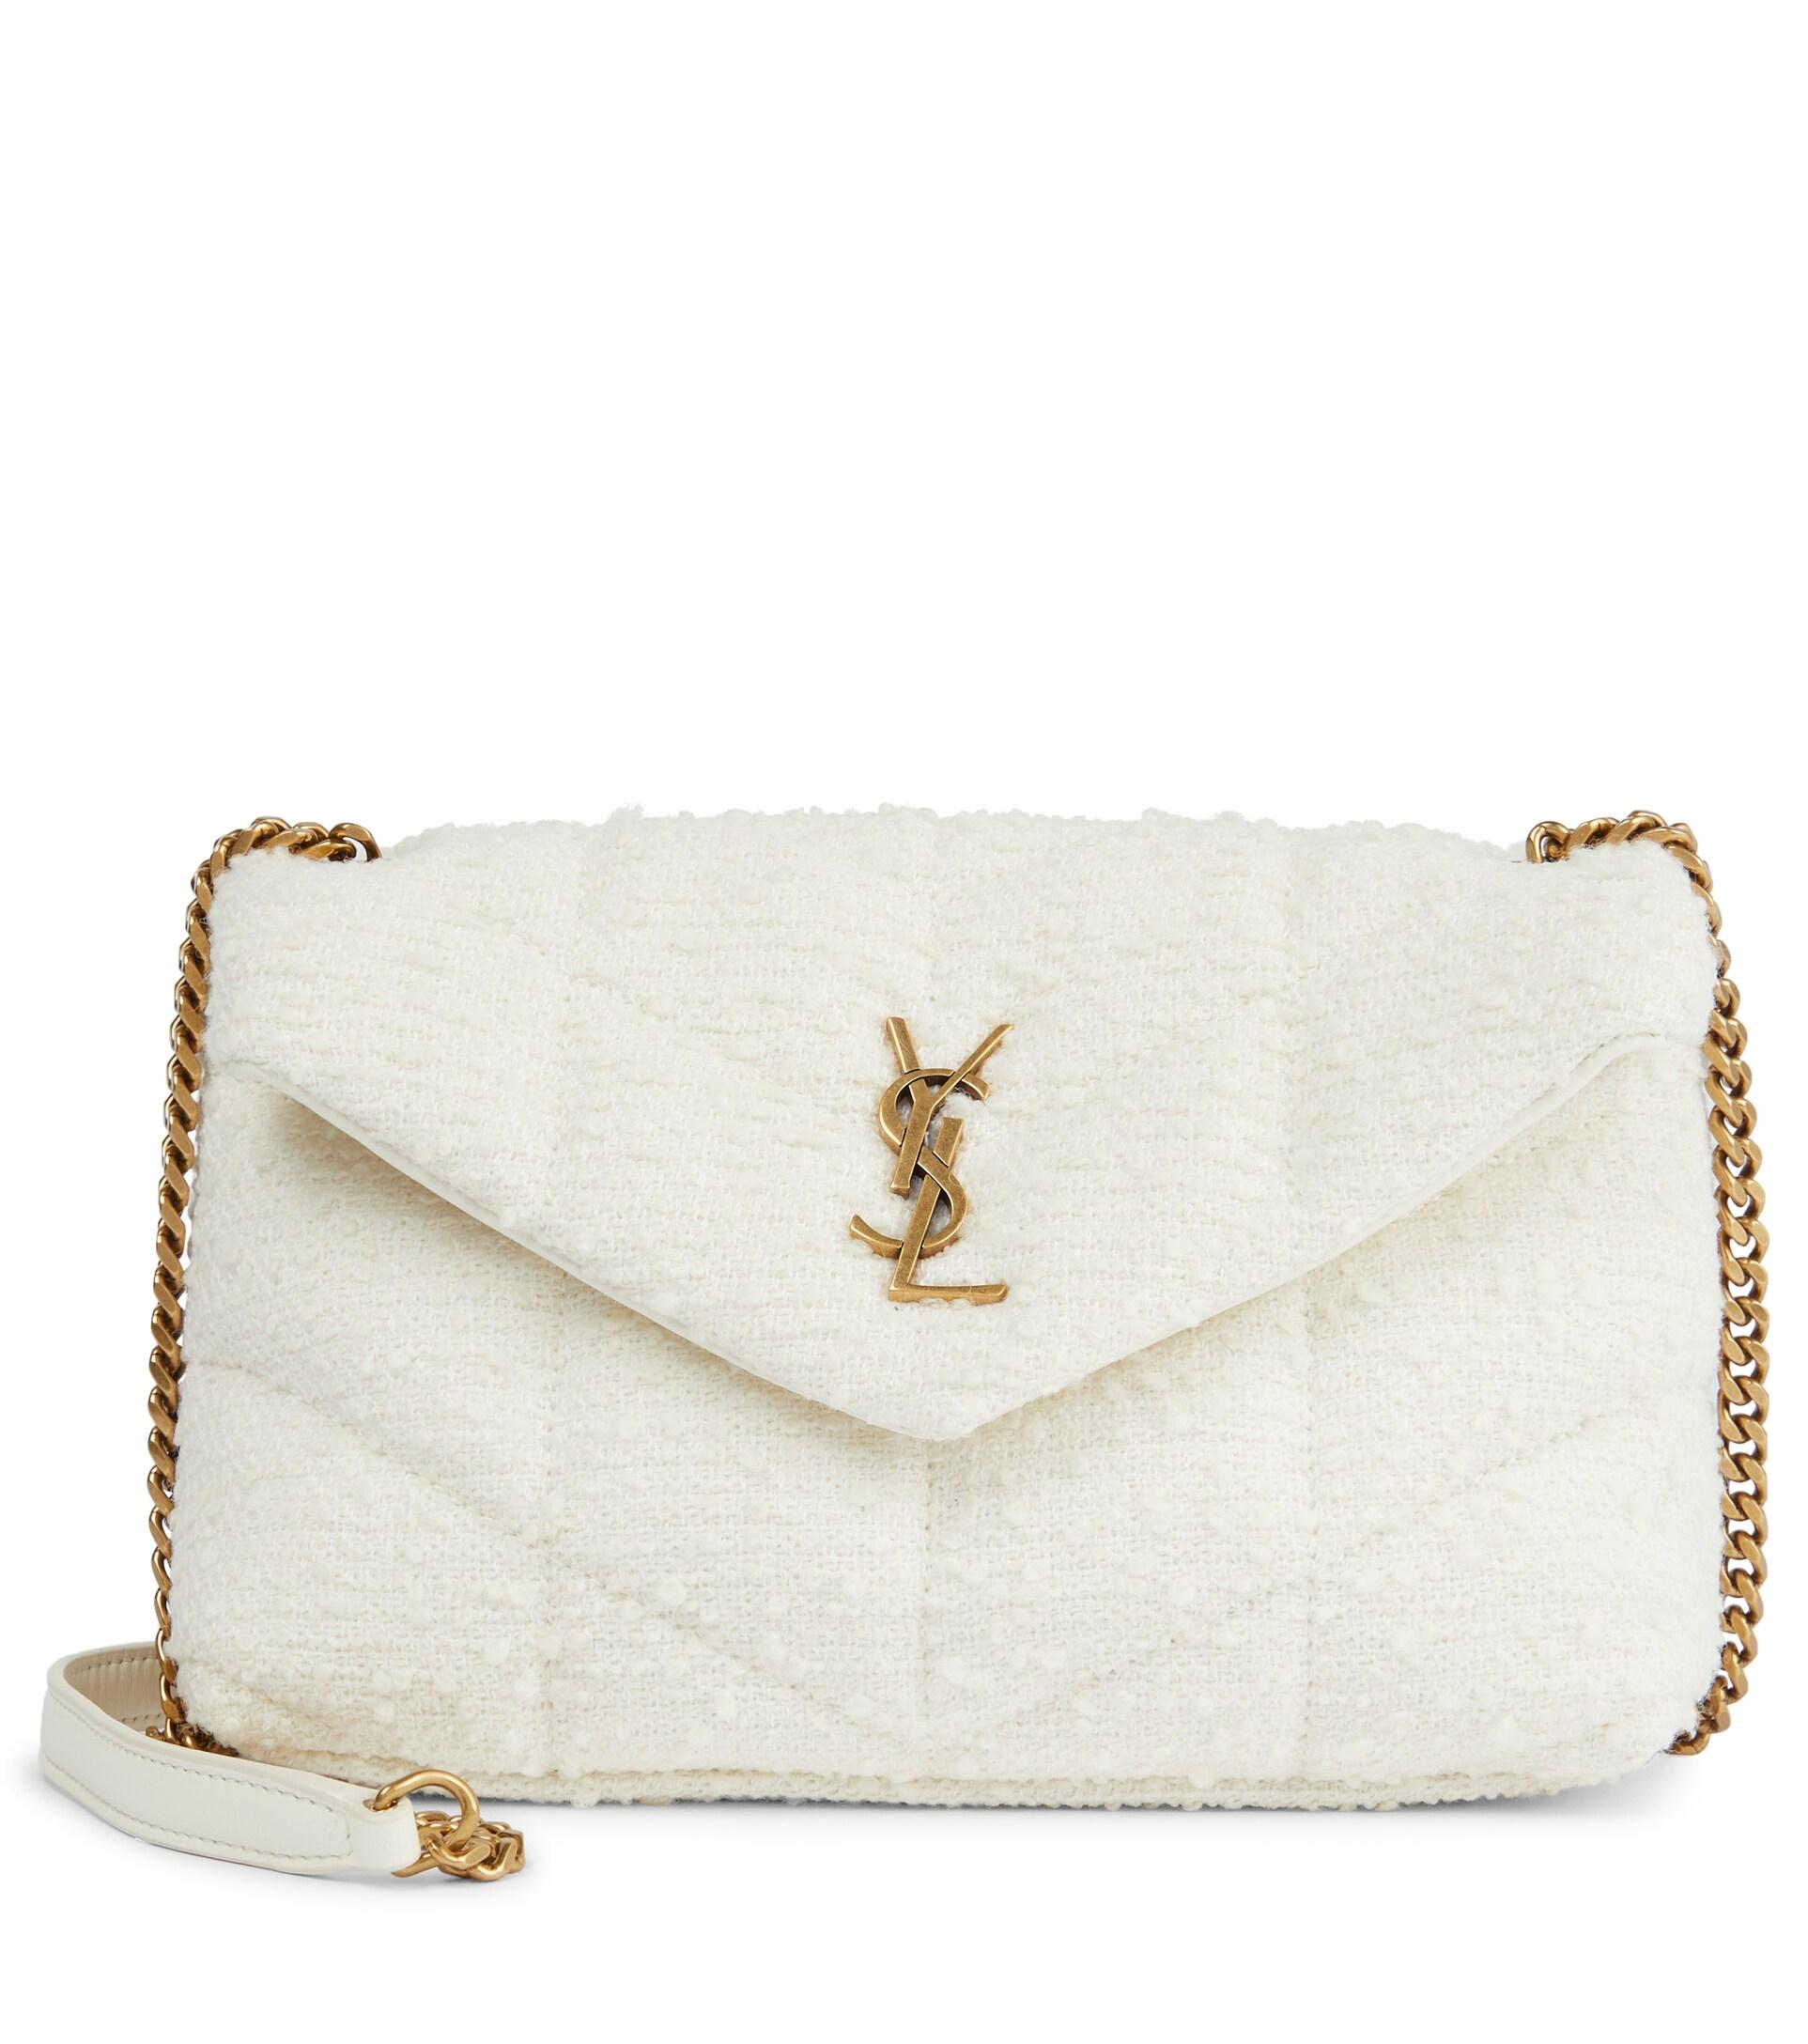 Saint Laurent Loulou Toy Puffer Boucle Tweed Shoulder Bag in Natural | Lyst